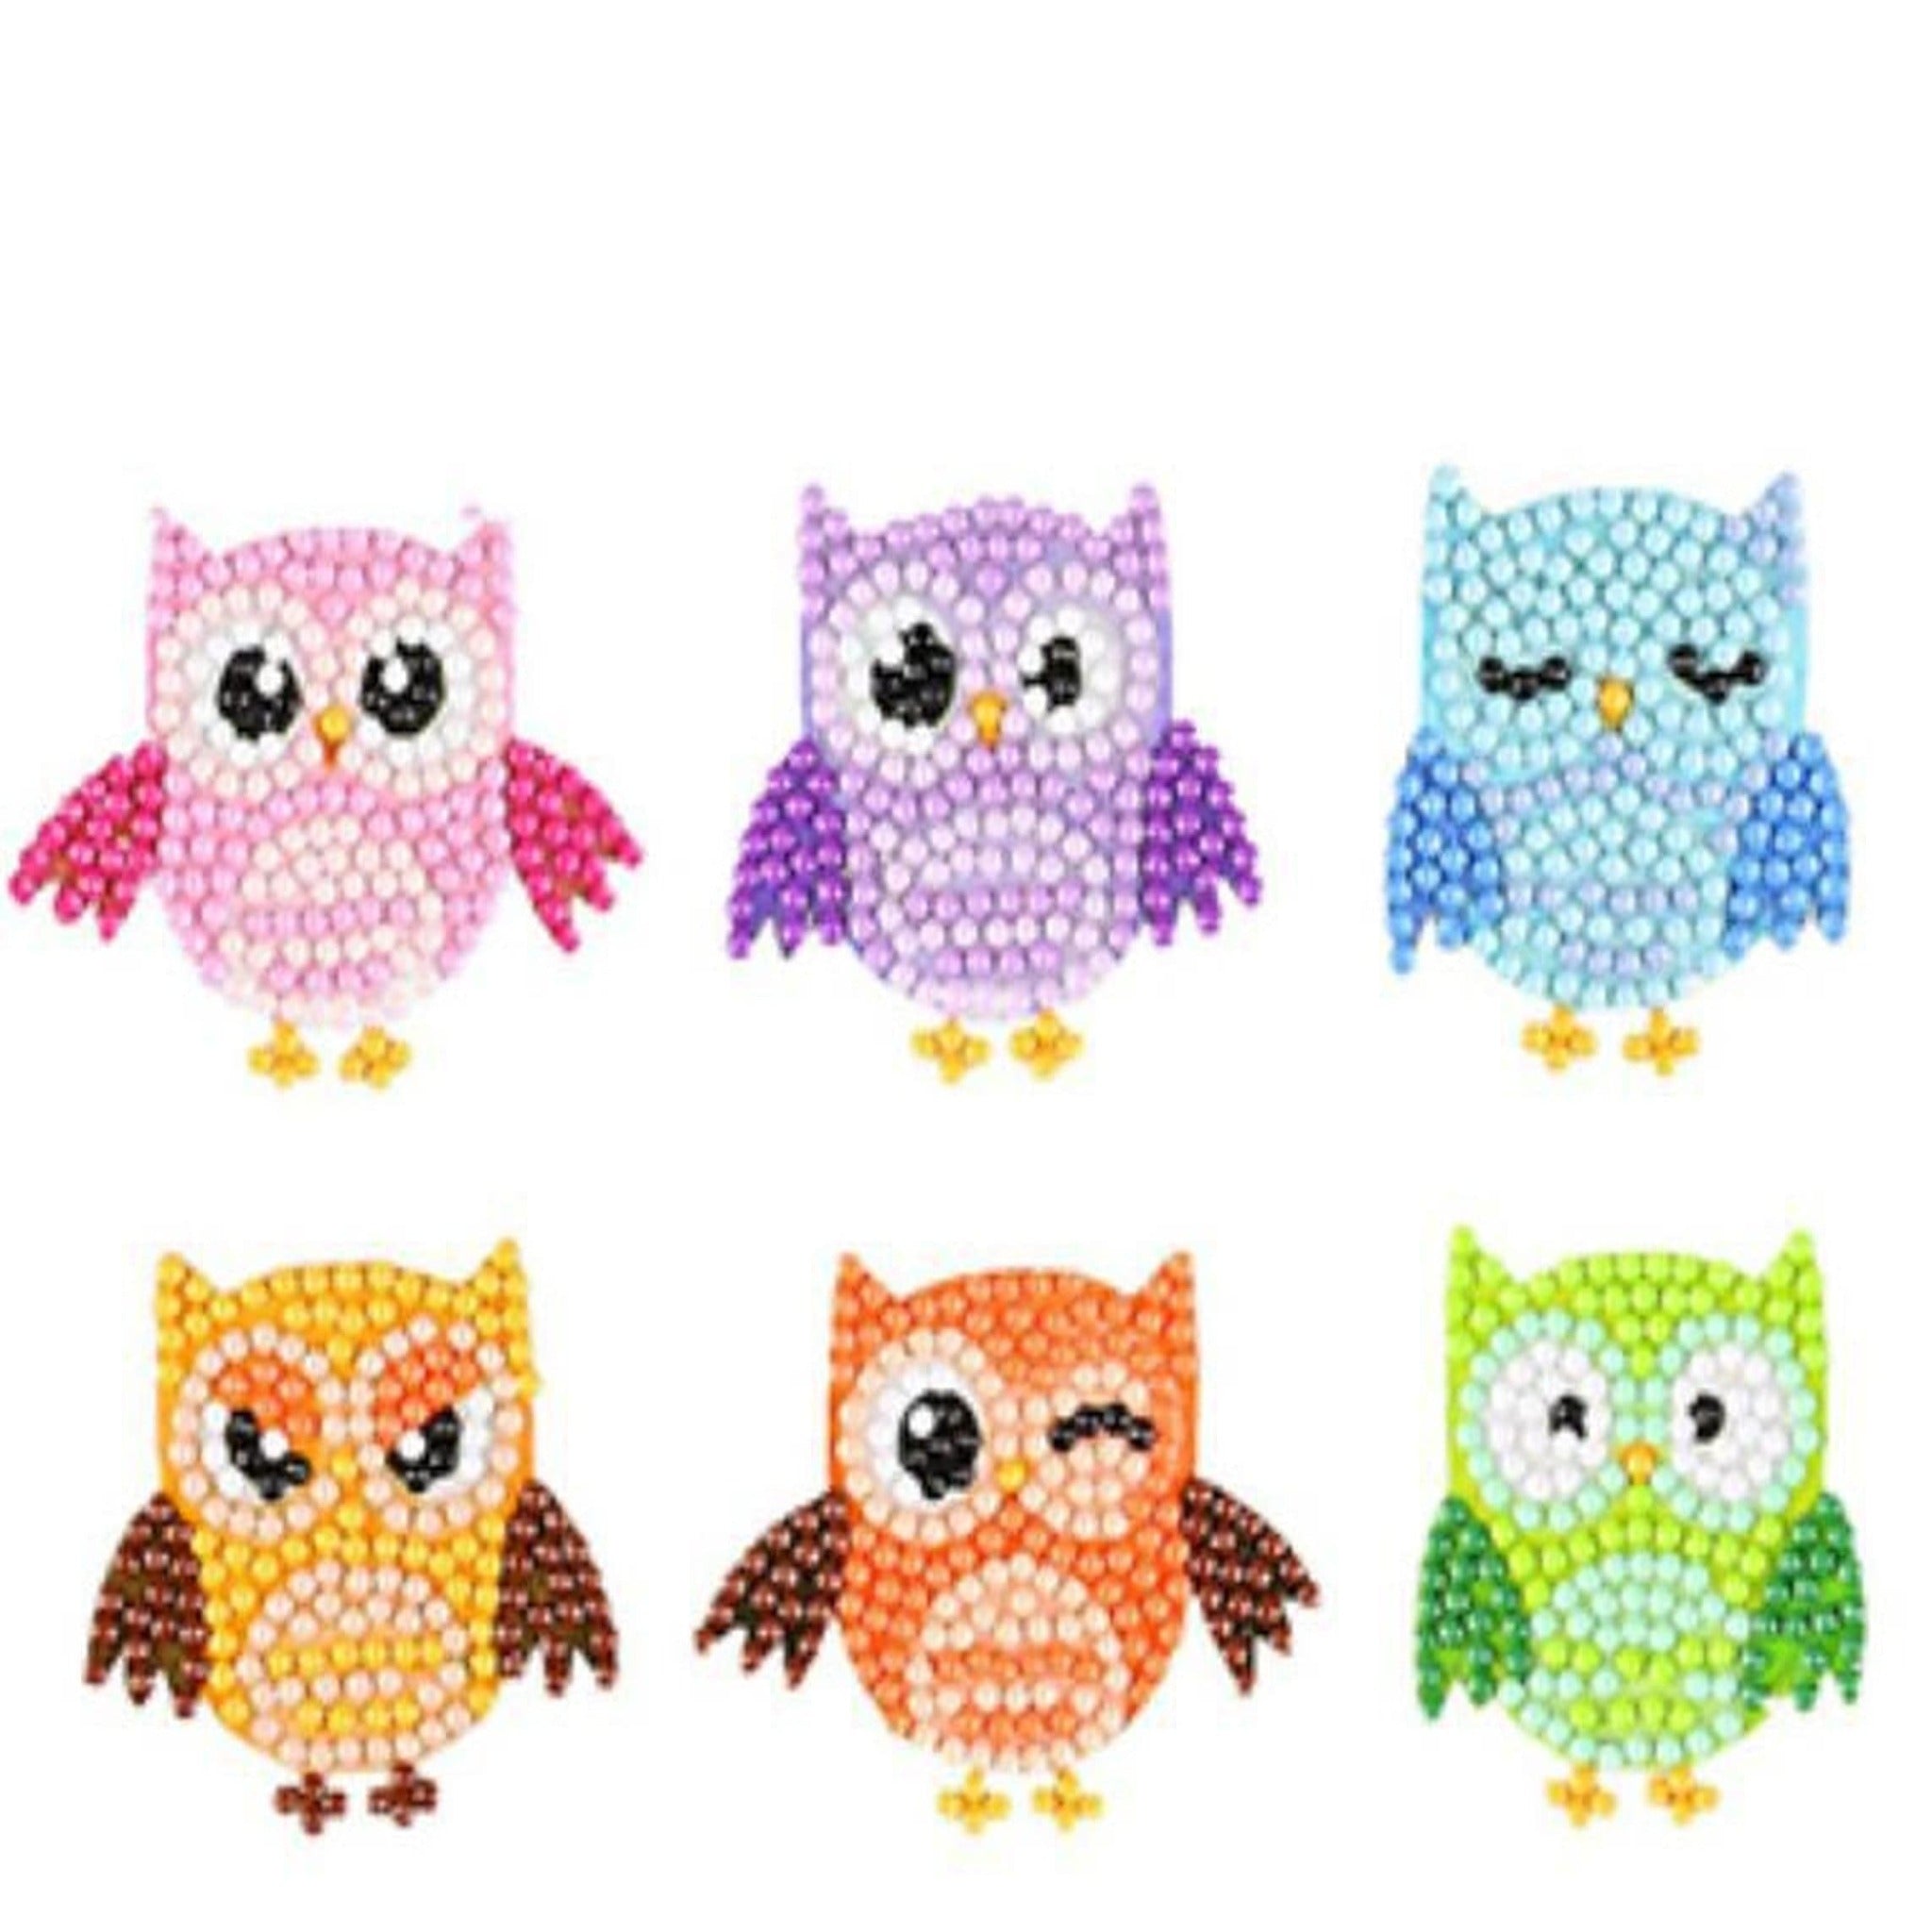 5D Diamond Painting Kit for Kids - Owl Party